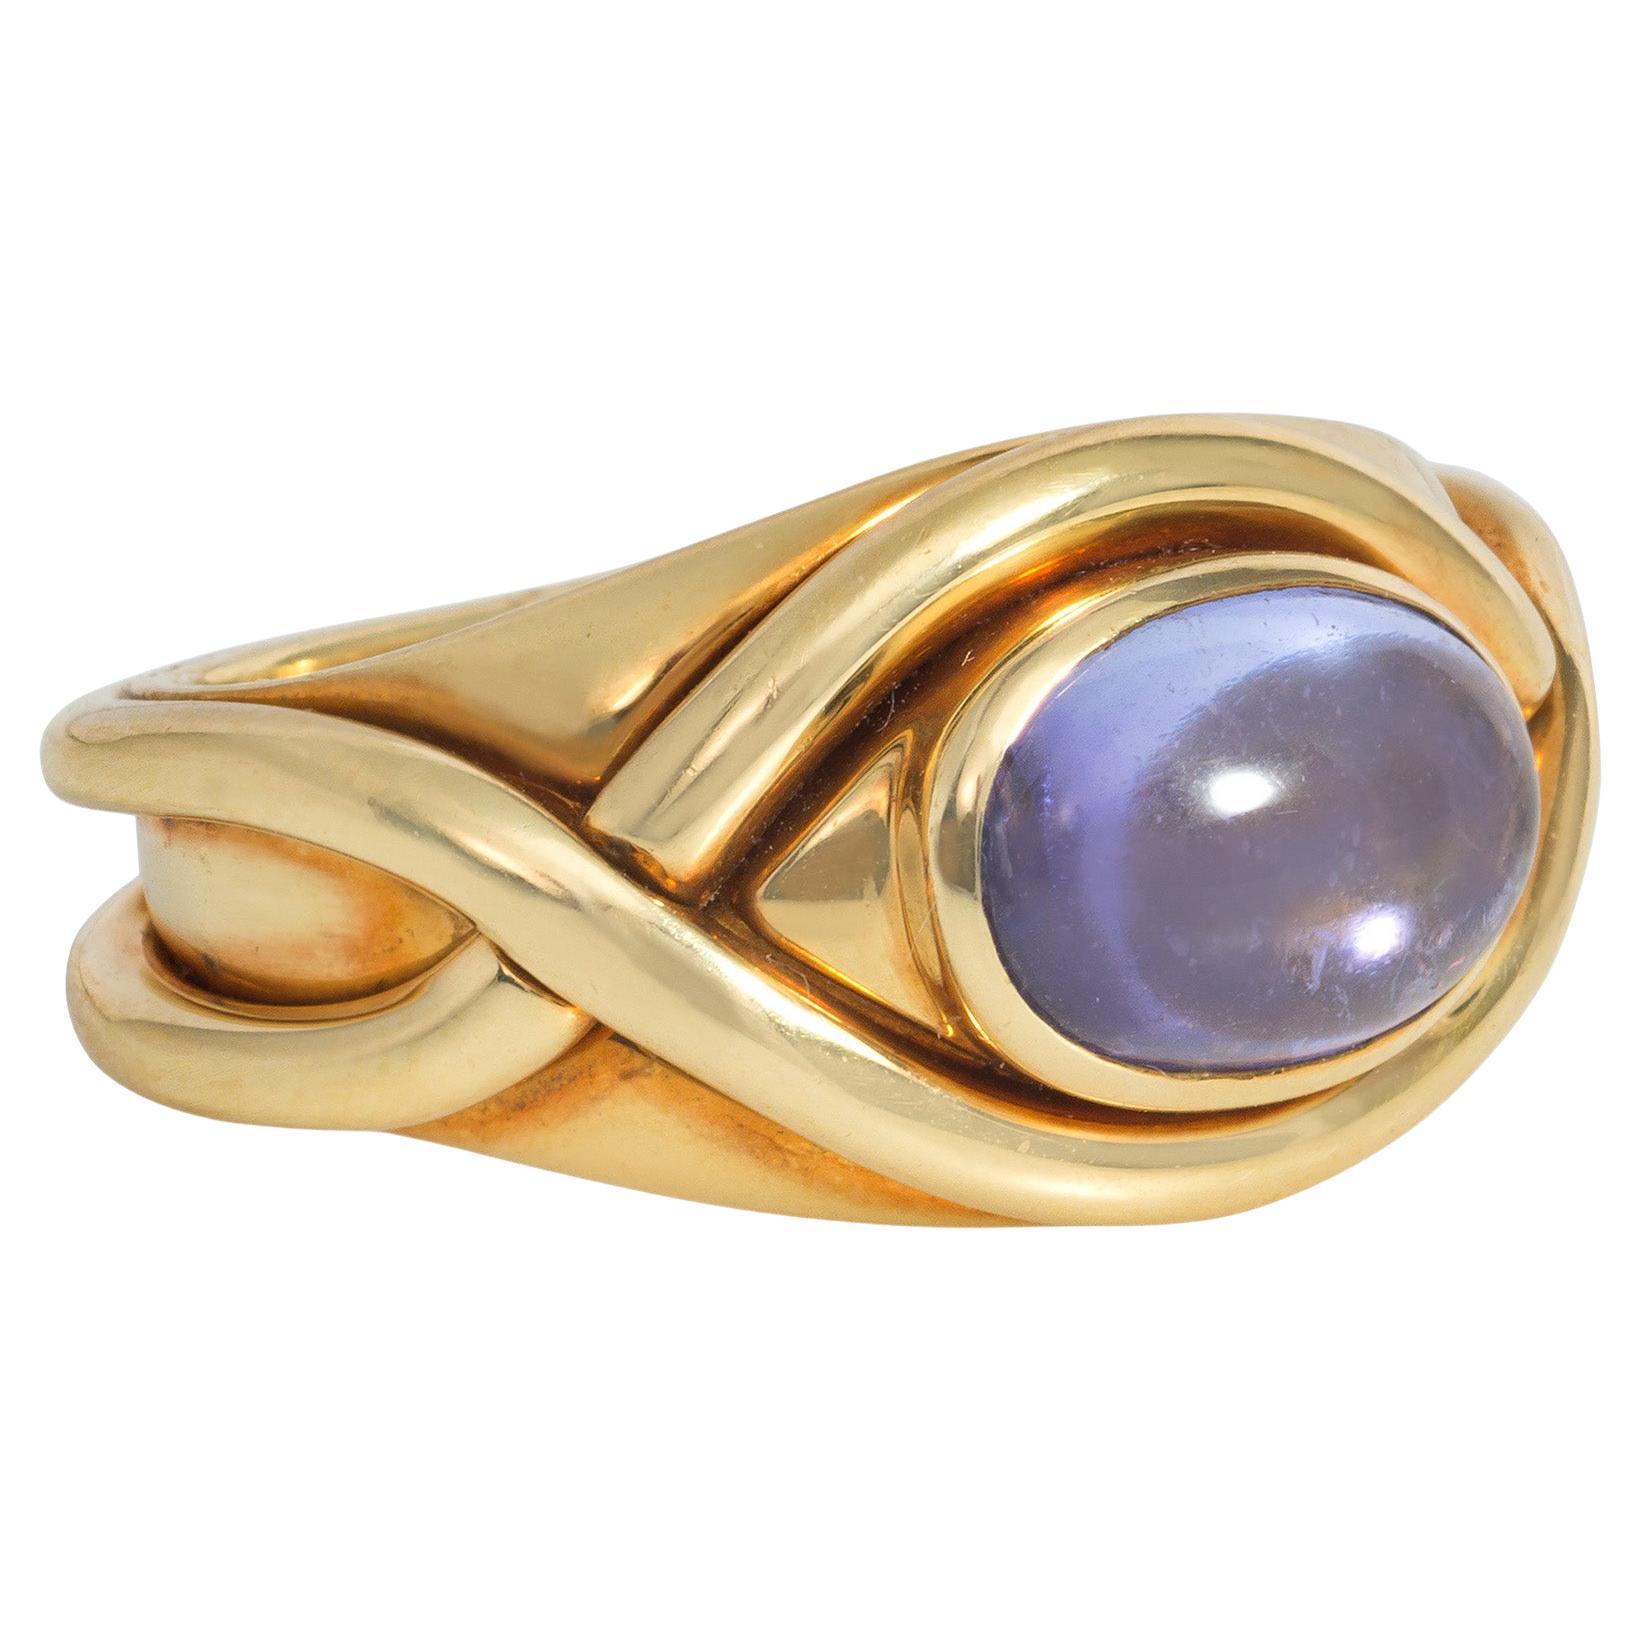 Tiffany & Co. Estate Gold and Cabochon Tanzanite Ring of Wrapped Design